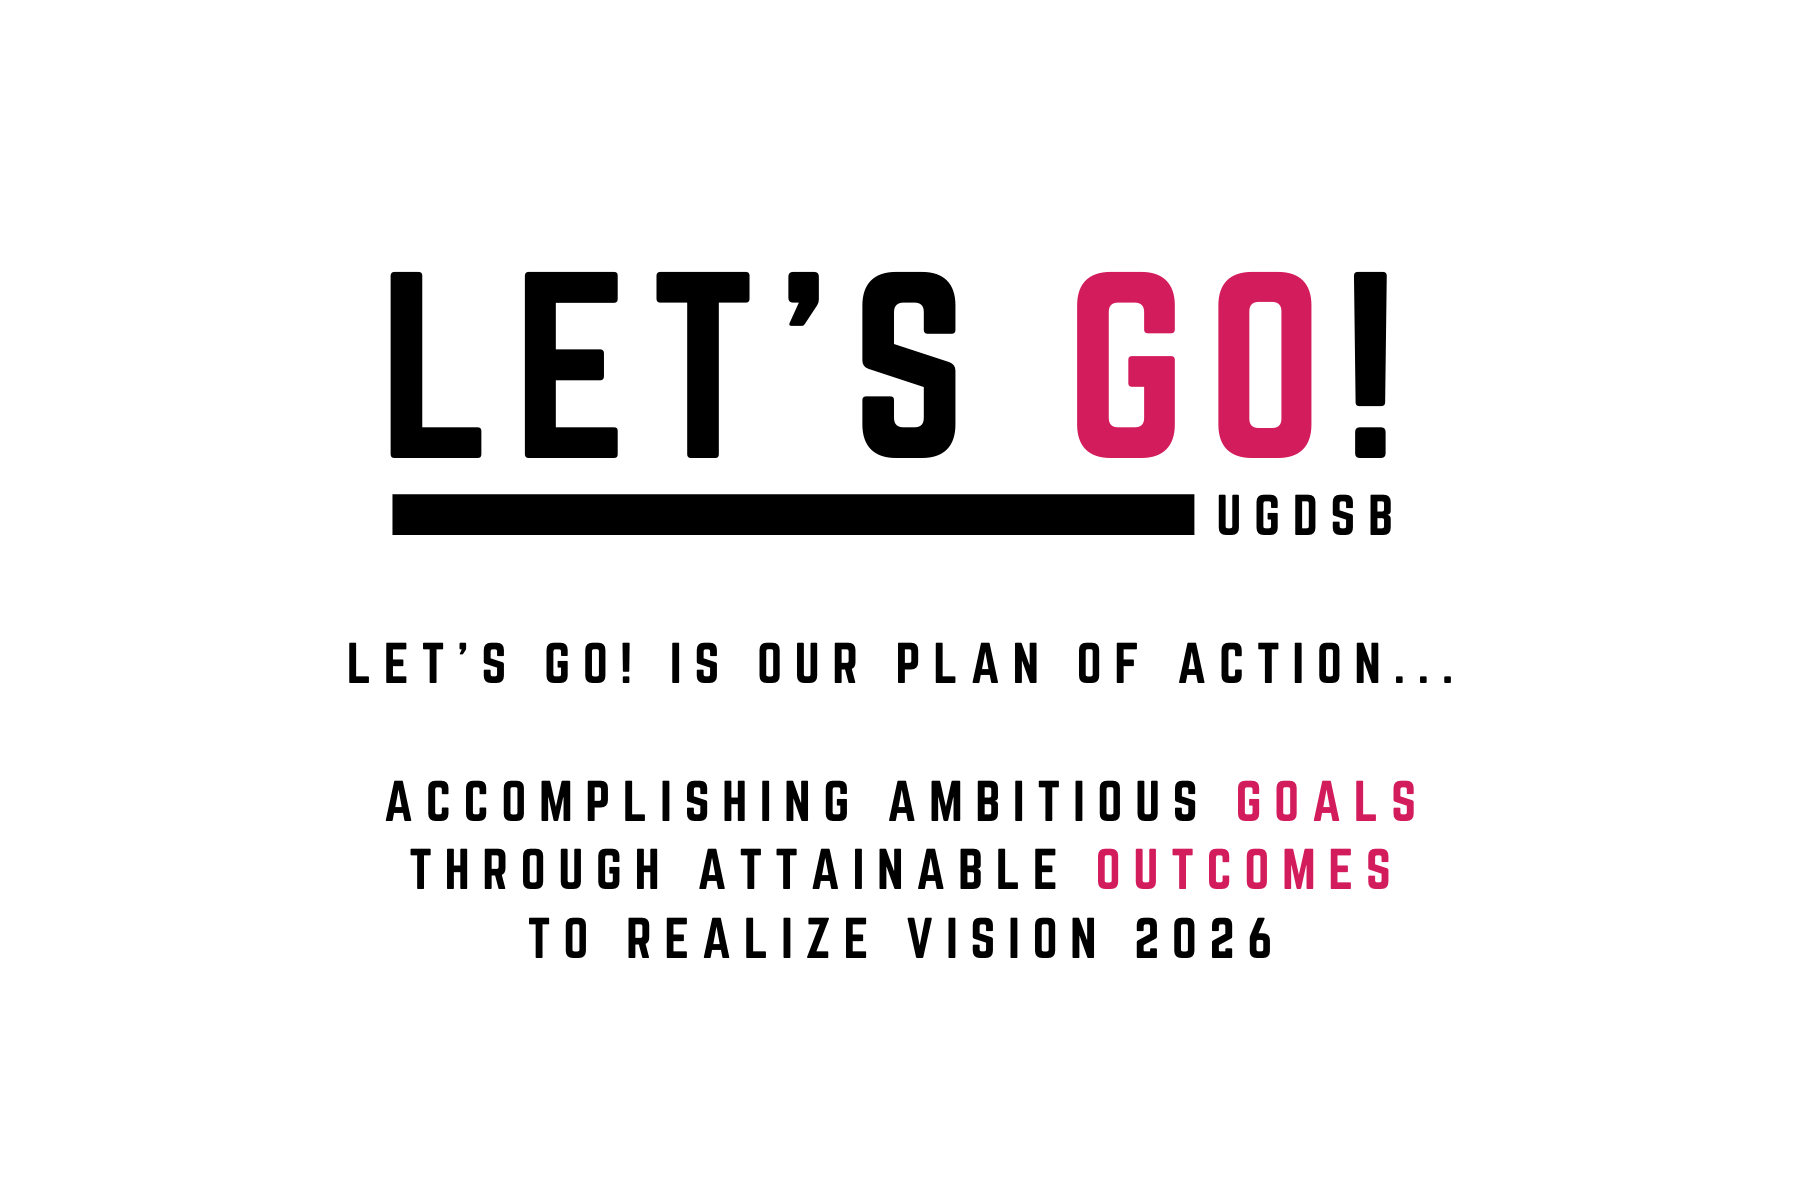 let's go! is our plan of action...accomplishing ambitious goals through attainable outcomes to realize vision 2026.